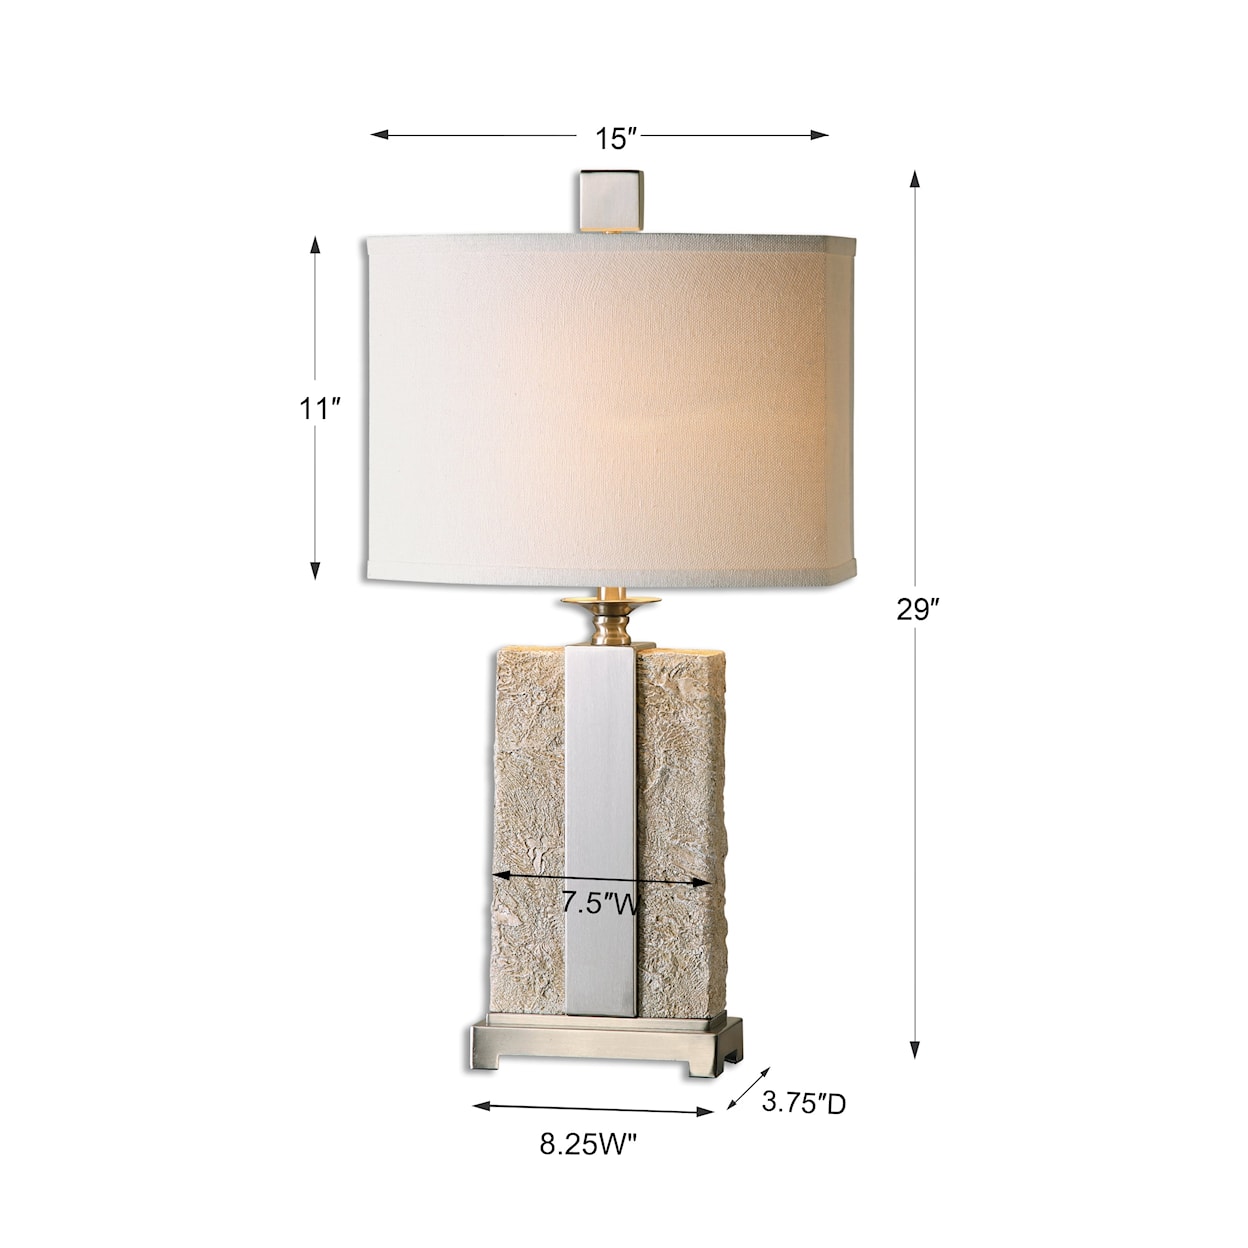 Uttermost Table Lamps Bonea Stone Ivory Table Lamp